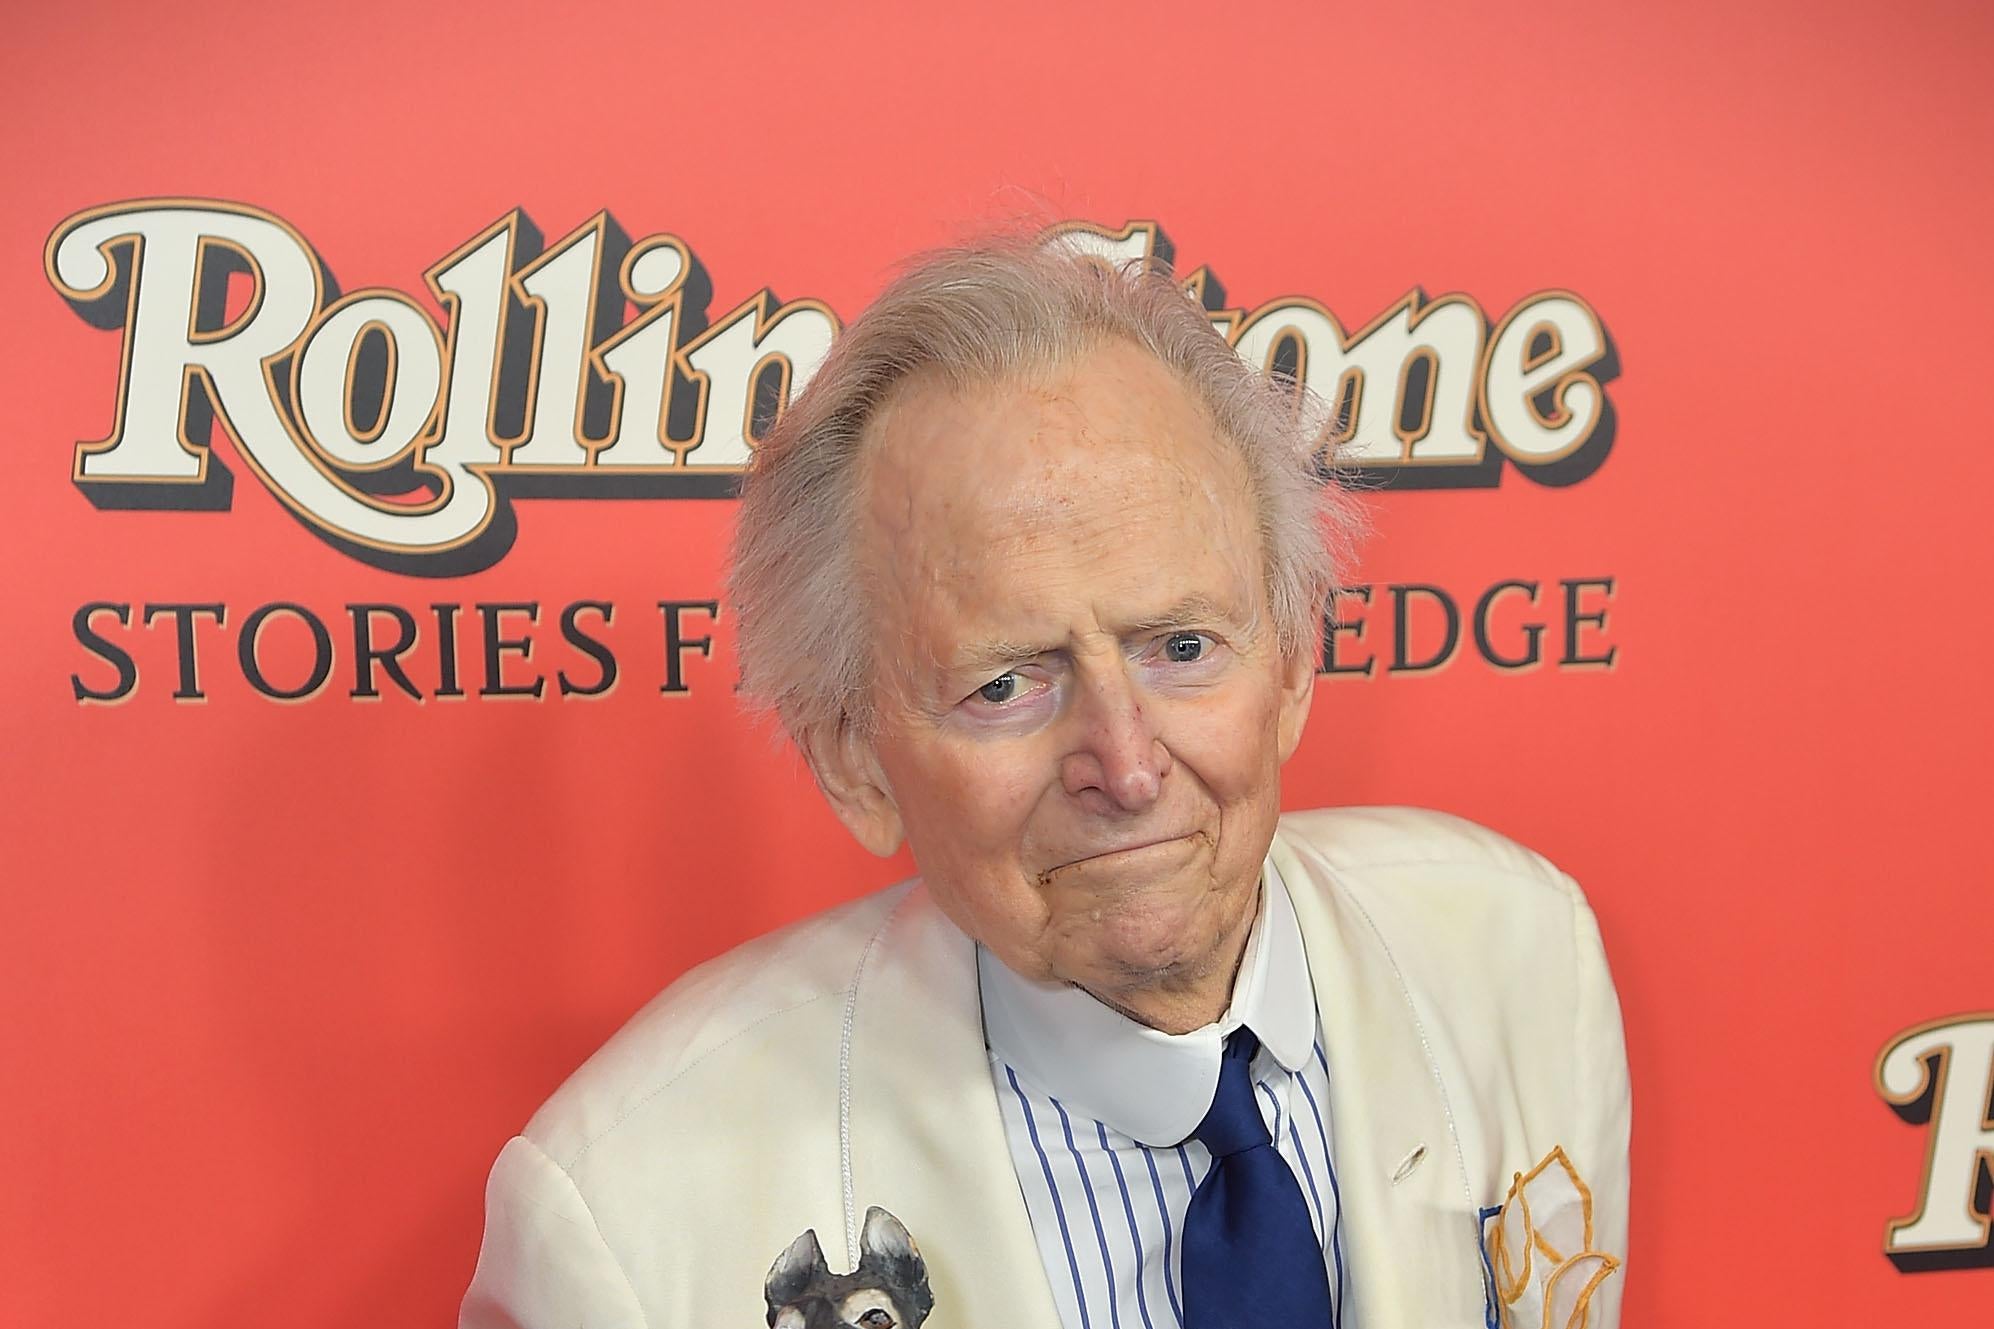 NEW YORK, NY - OCTOBER 30:  Tom Wolfe attends 'Rolling Stone Stories From The Edge' World Premiere at Florence Gould Hall on October 30, 2017 in New York City.  (Photo by Theo Wargo/Getty Images)